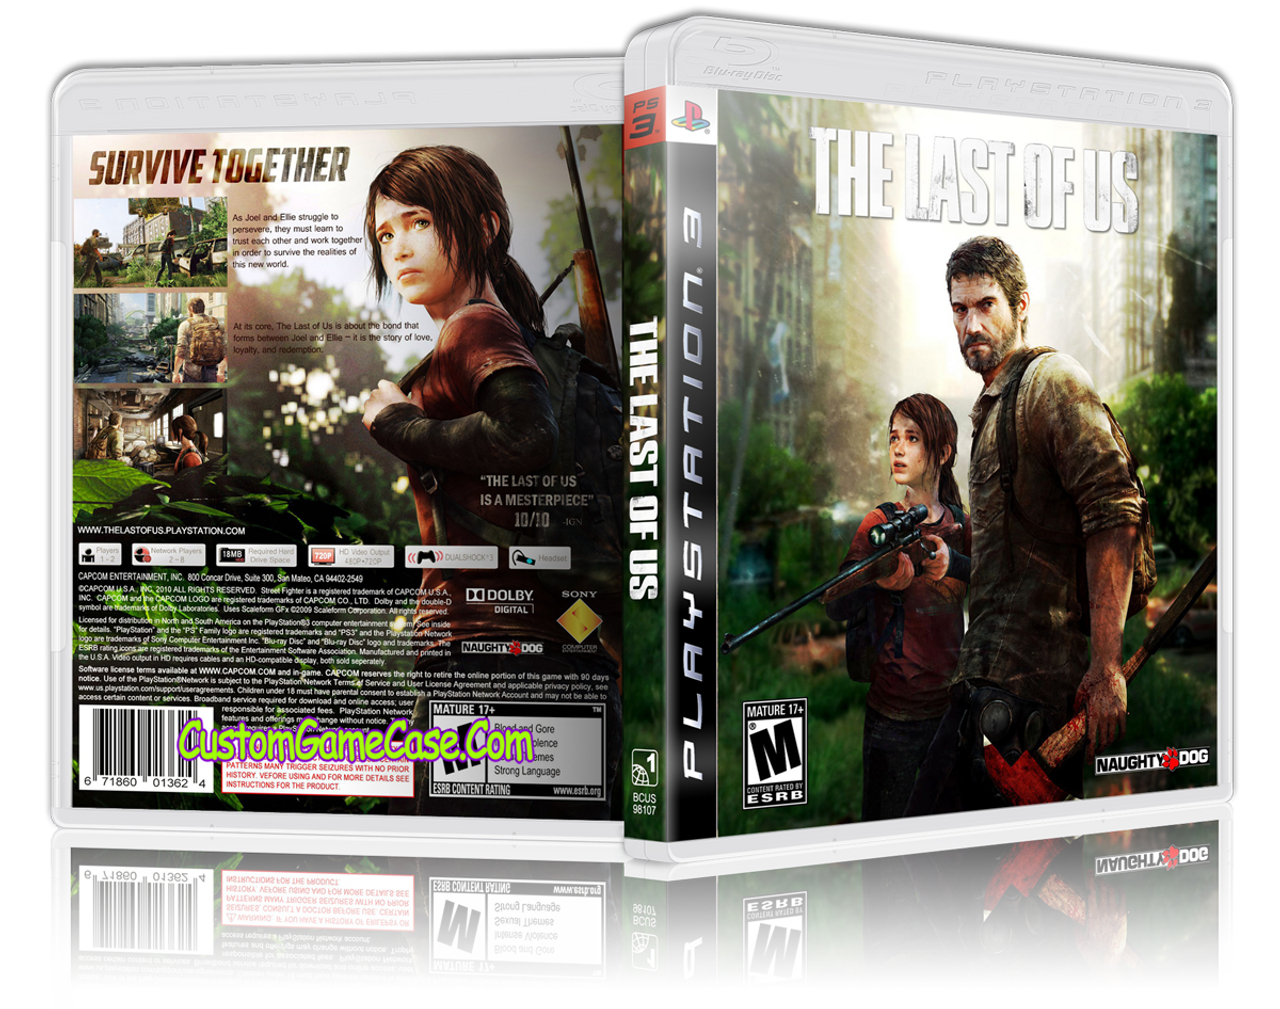  The Last of Us - PlayStation 3 : Sony Interactive